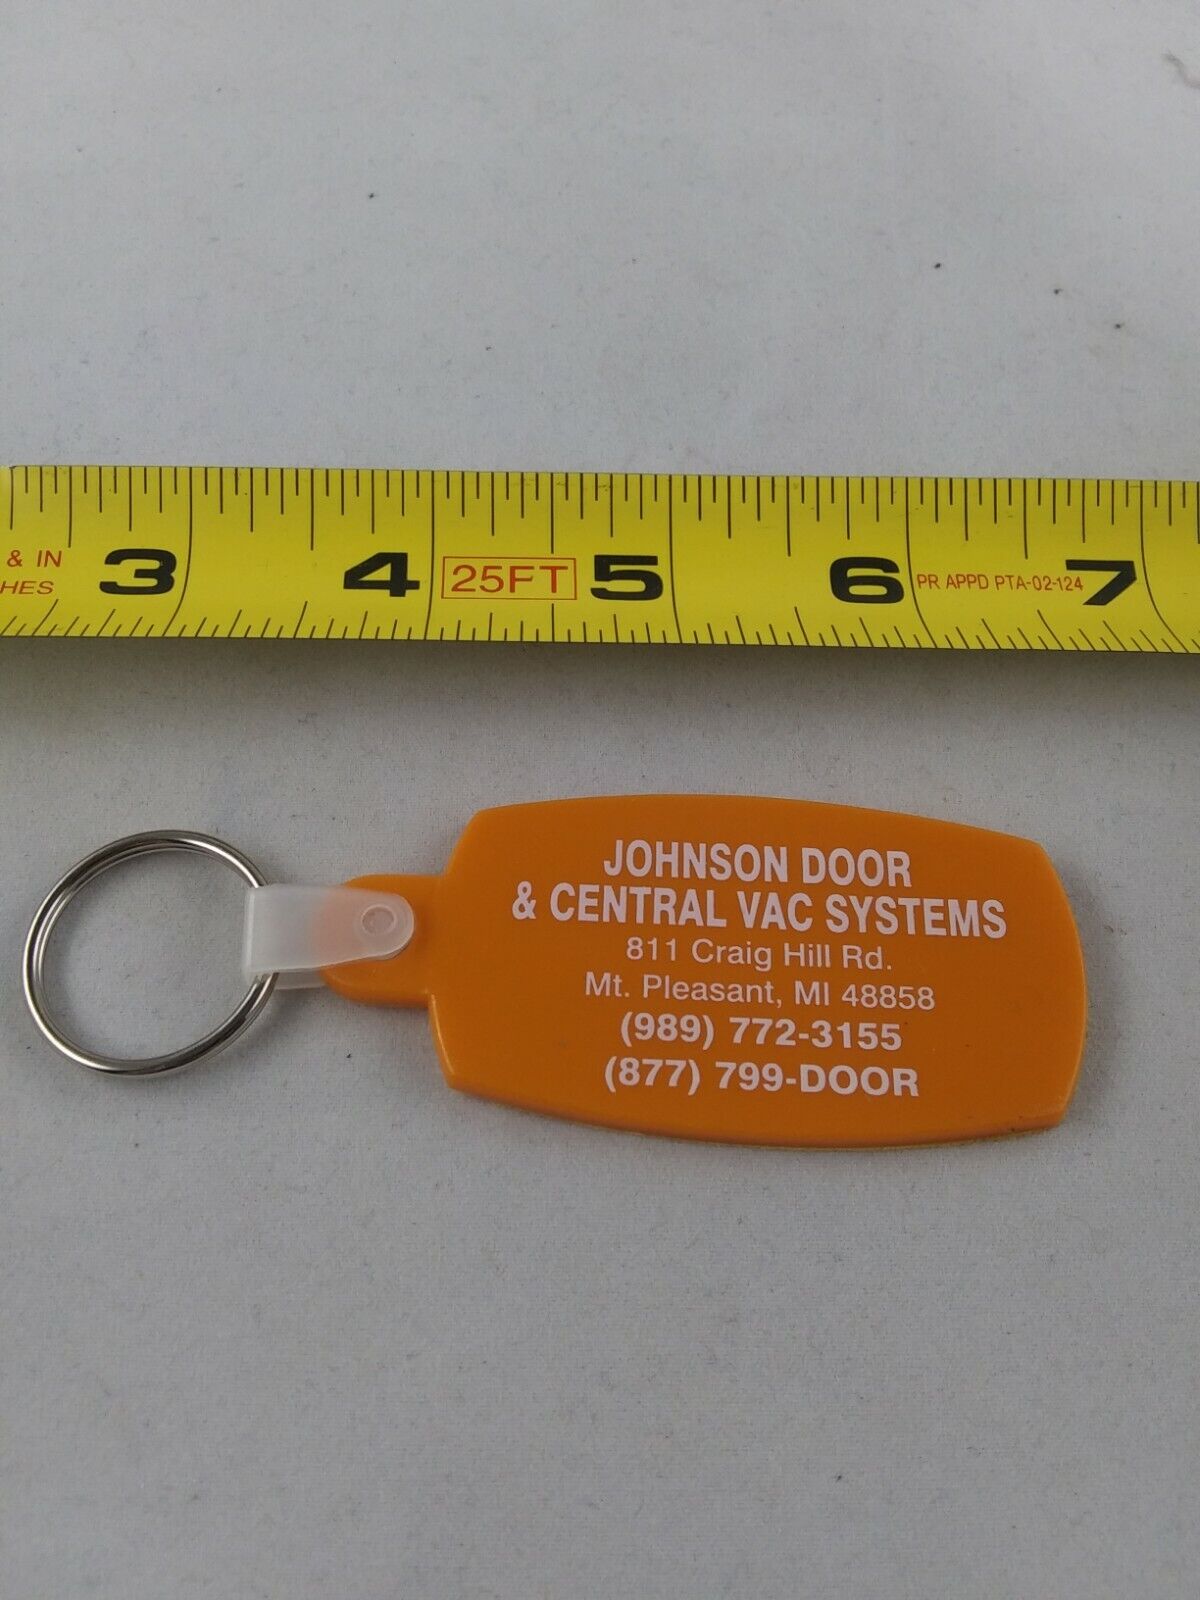 Vintage Johnson Door Central Vac Systems Keychain Key Chain Fob Ring **QQ7